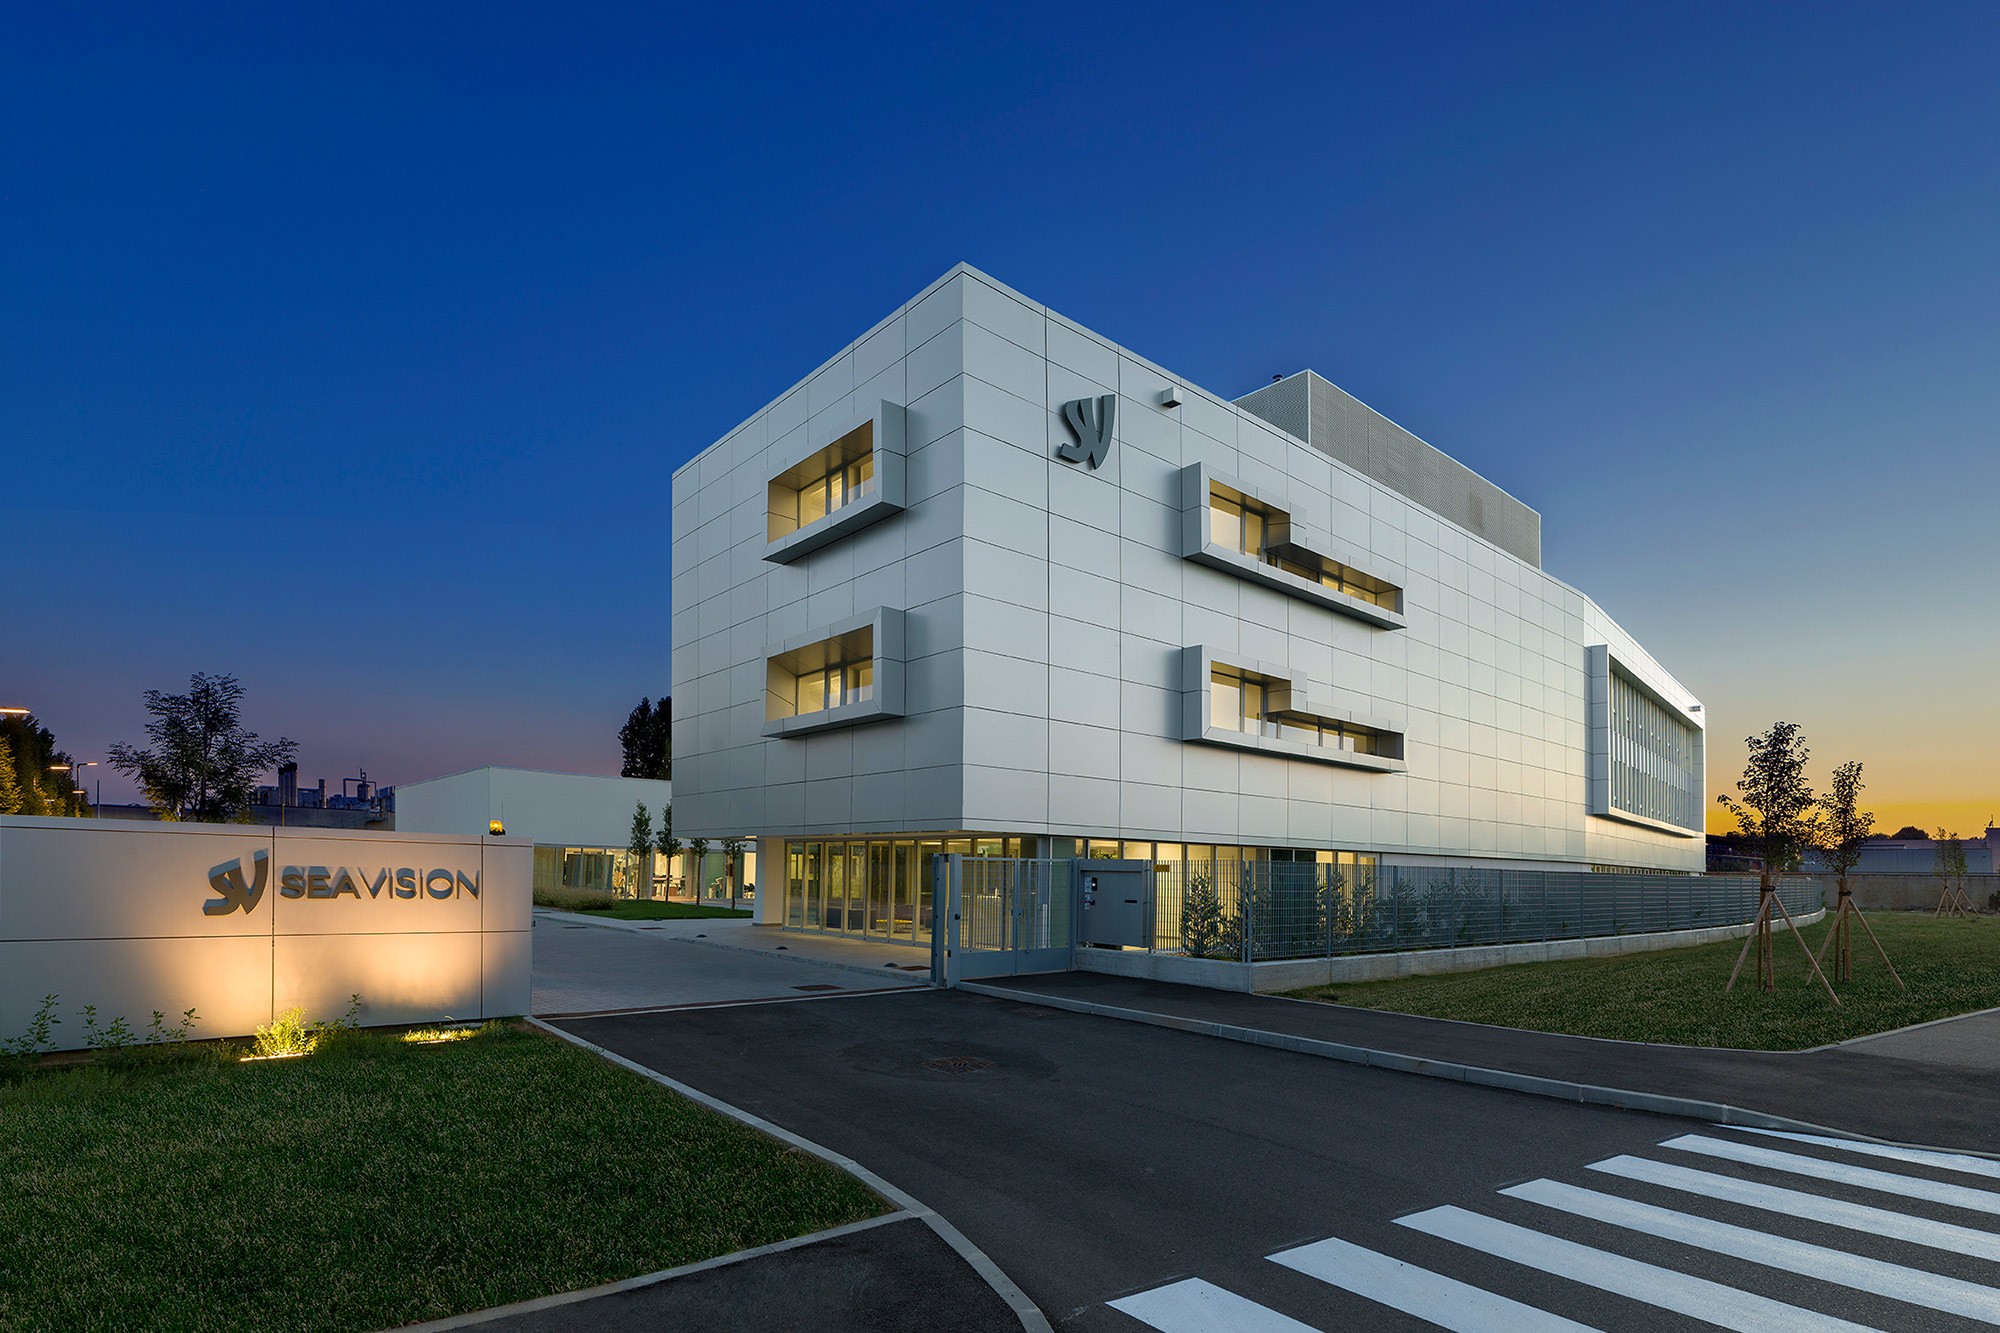 SEA Vision Group headquarters in Pavia (Milan)